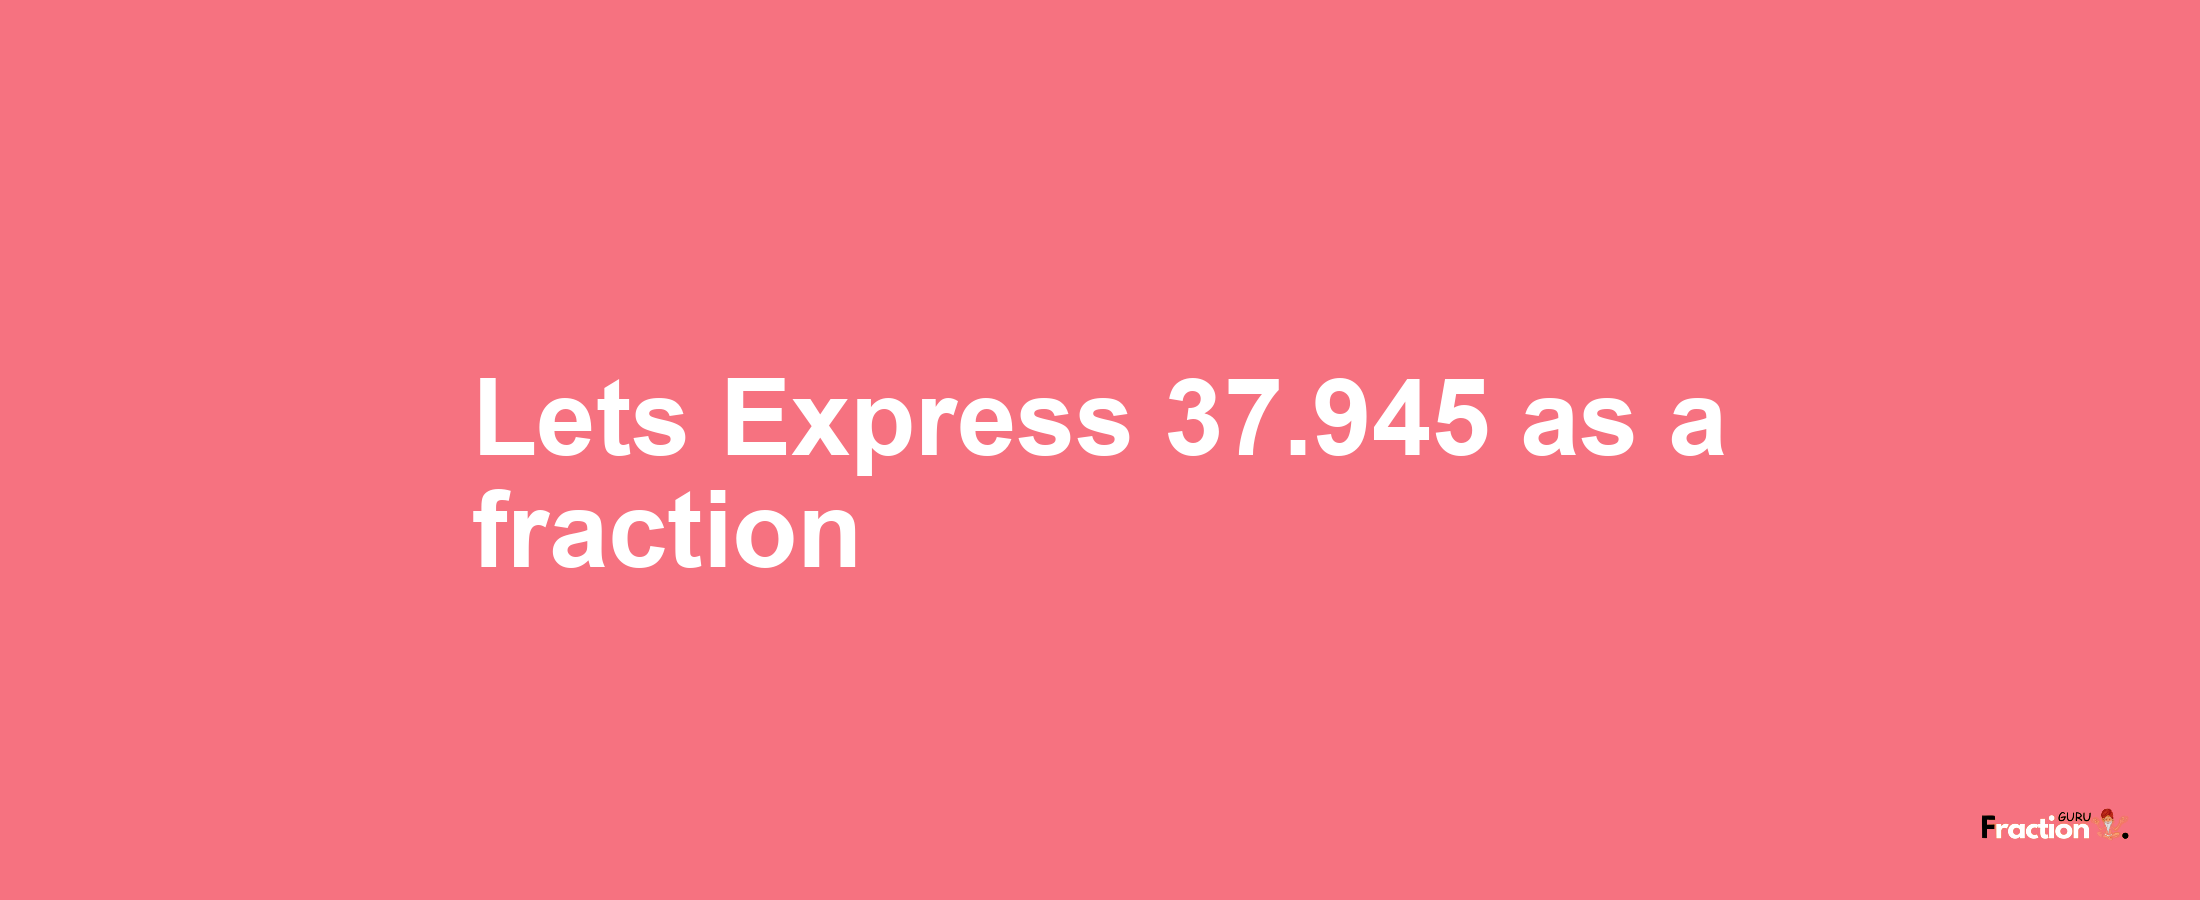 Lets Express 37.945 as afraction